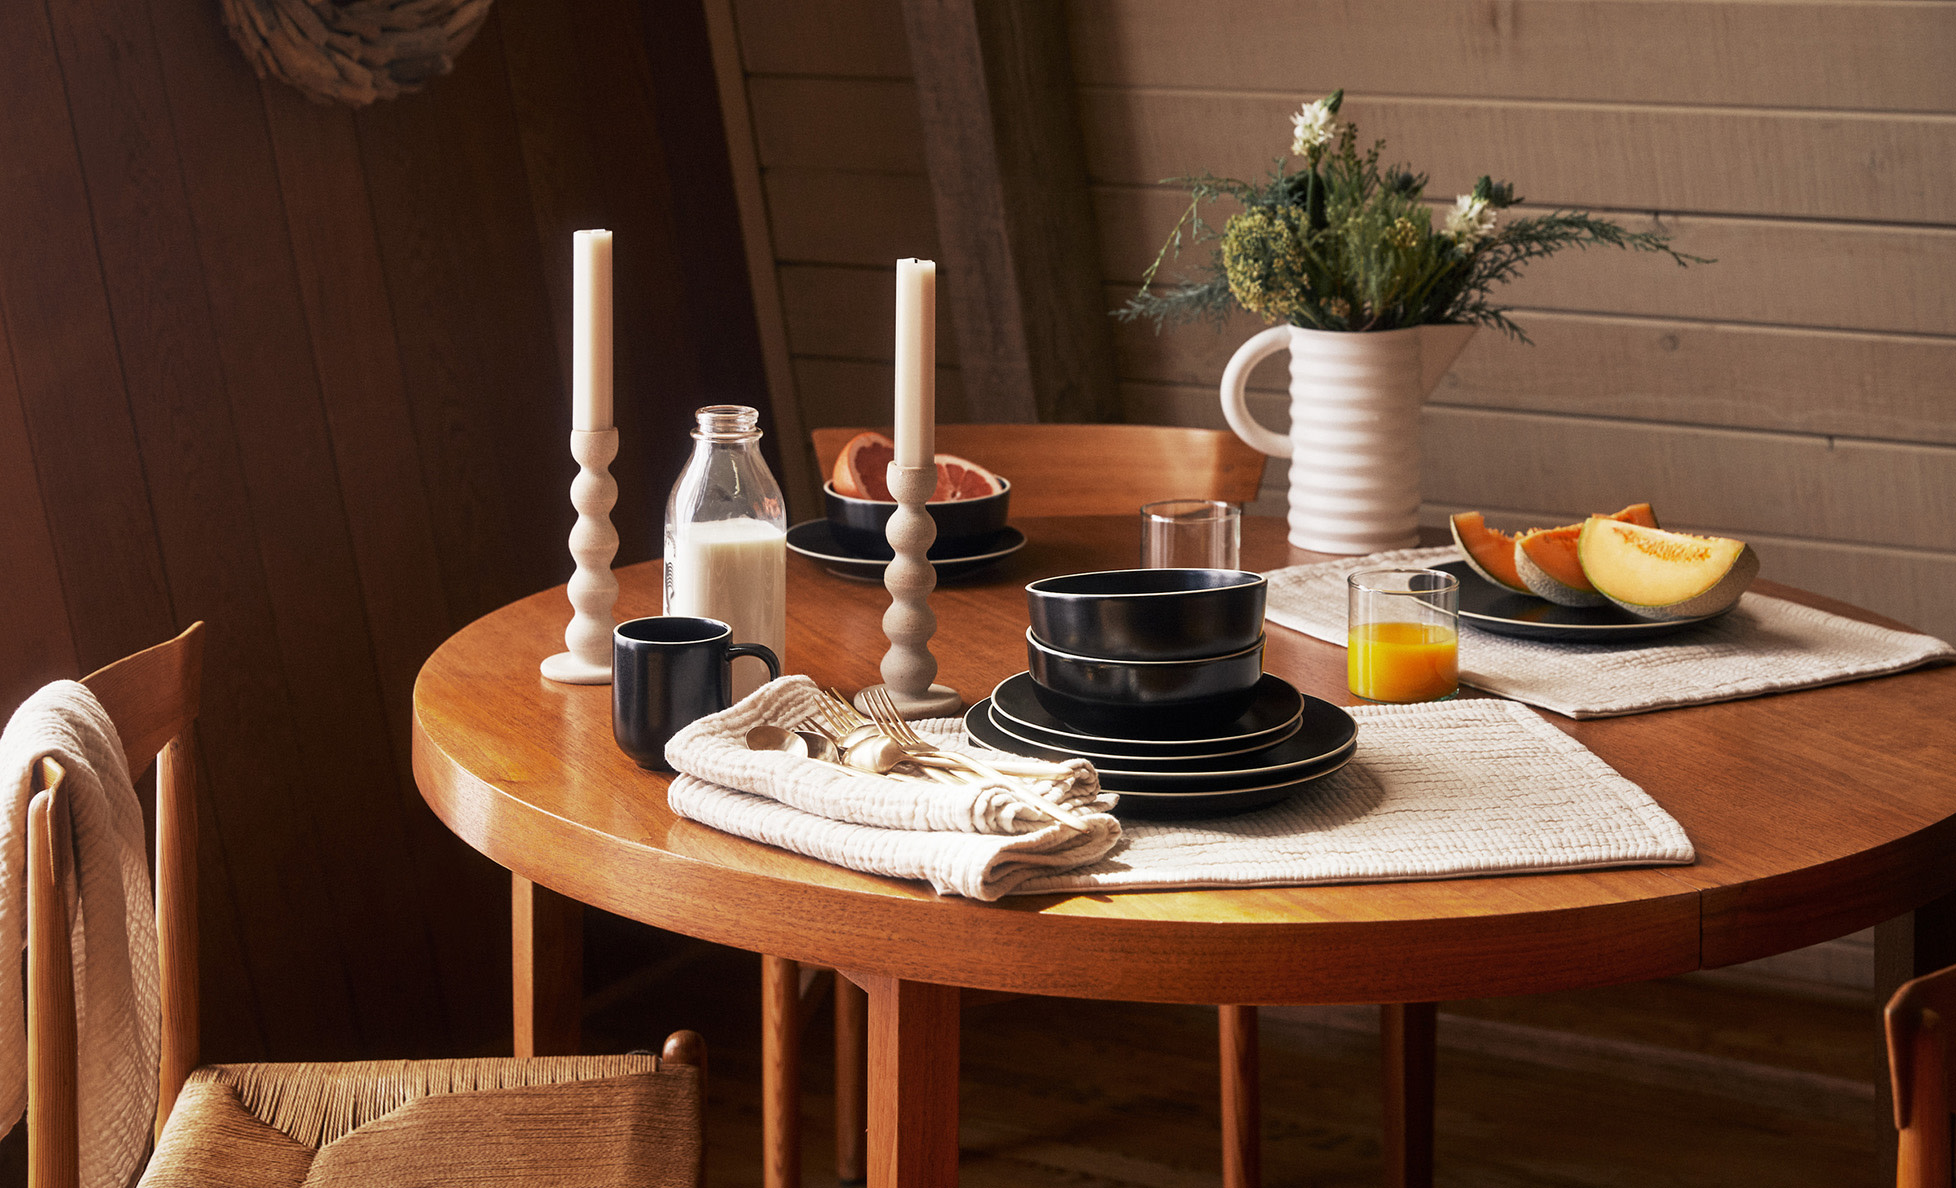 Round wood table with various plates, vases, and candlesticks in a cozy wood cabin